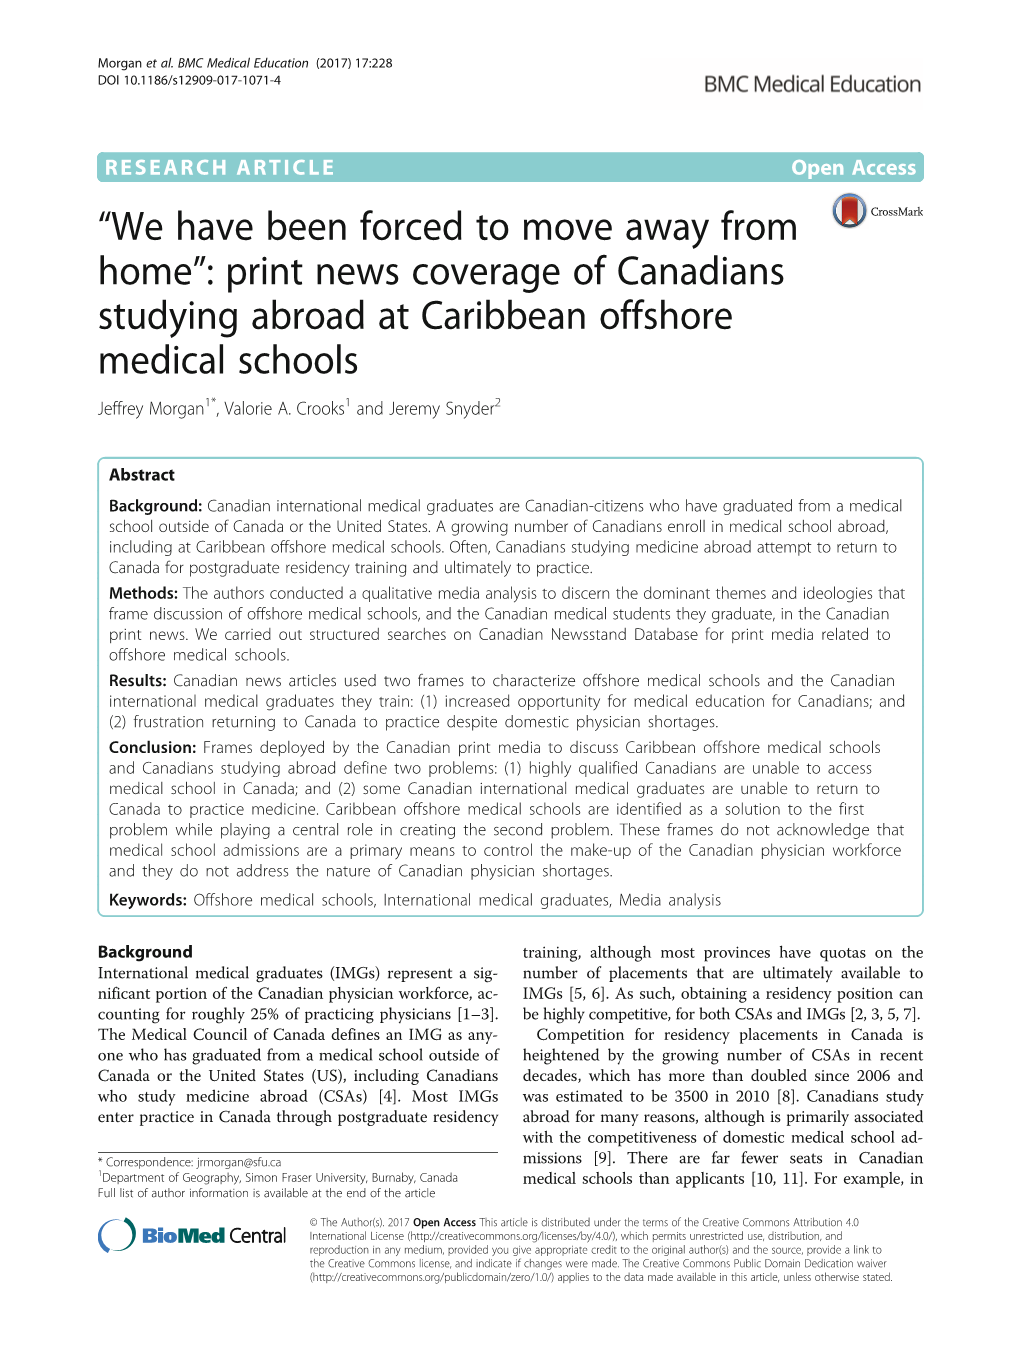 Print News Coverage of Canadians Studying Abroad at Caribbean Offshore Medical Schools Jeffrey Morgan1*, Valorie A